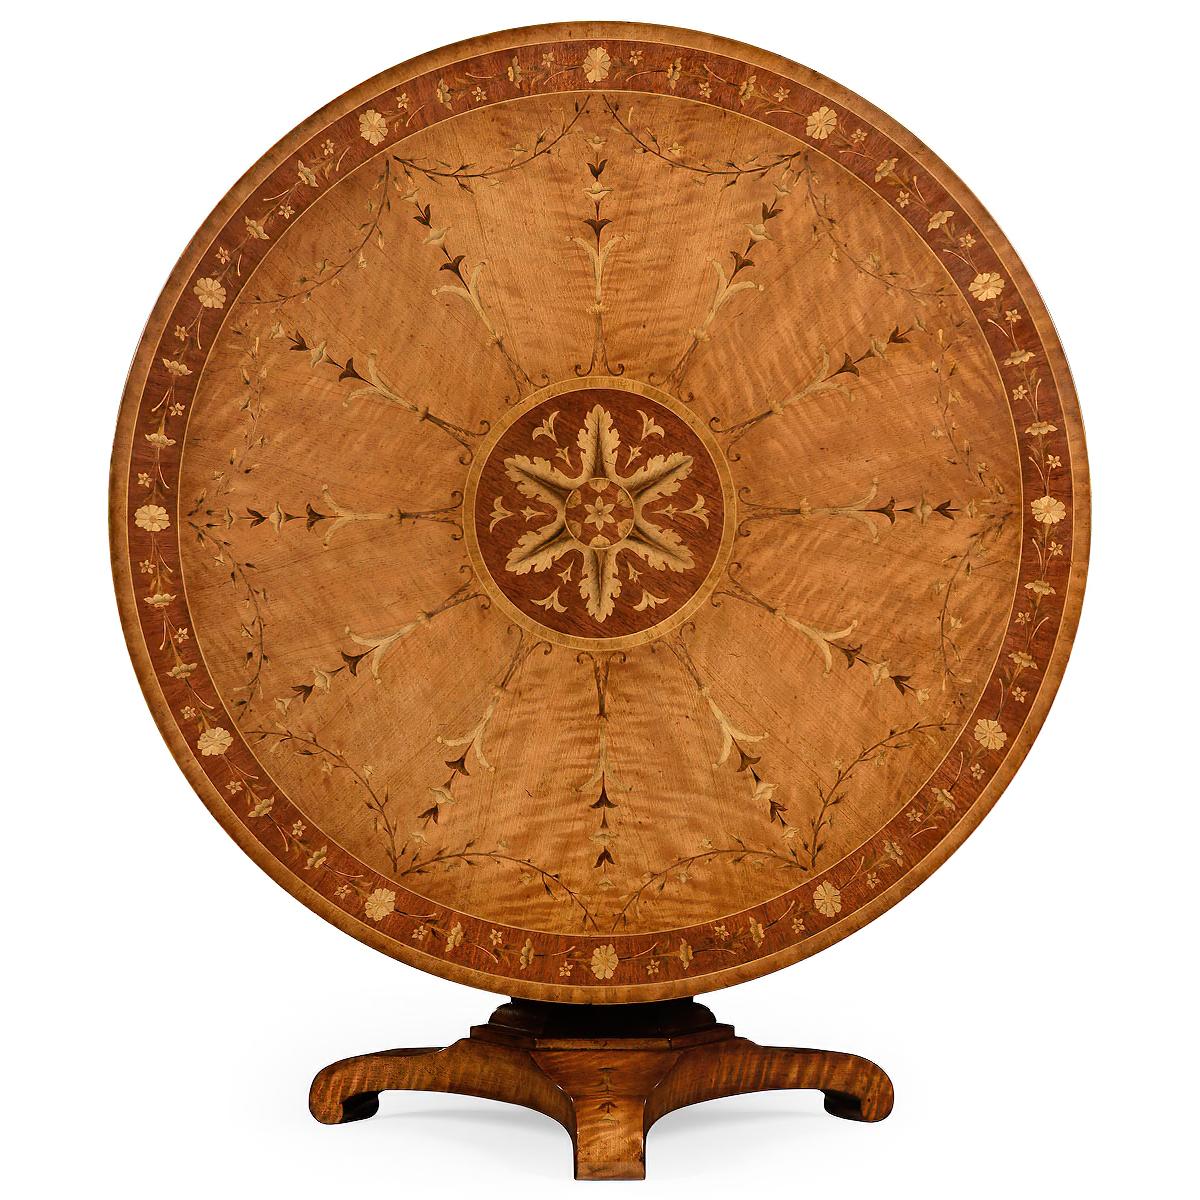 Regency style round tilt-top satinwood center table (or dining table) with neoclassic designs and a scrolling trefoil base.

Dimensions: 48